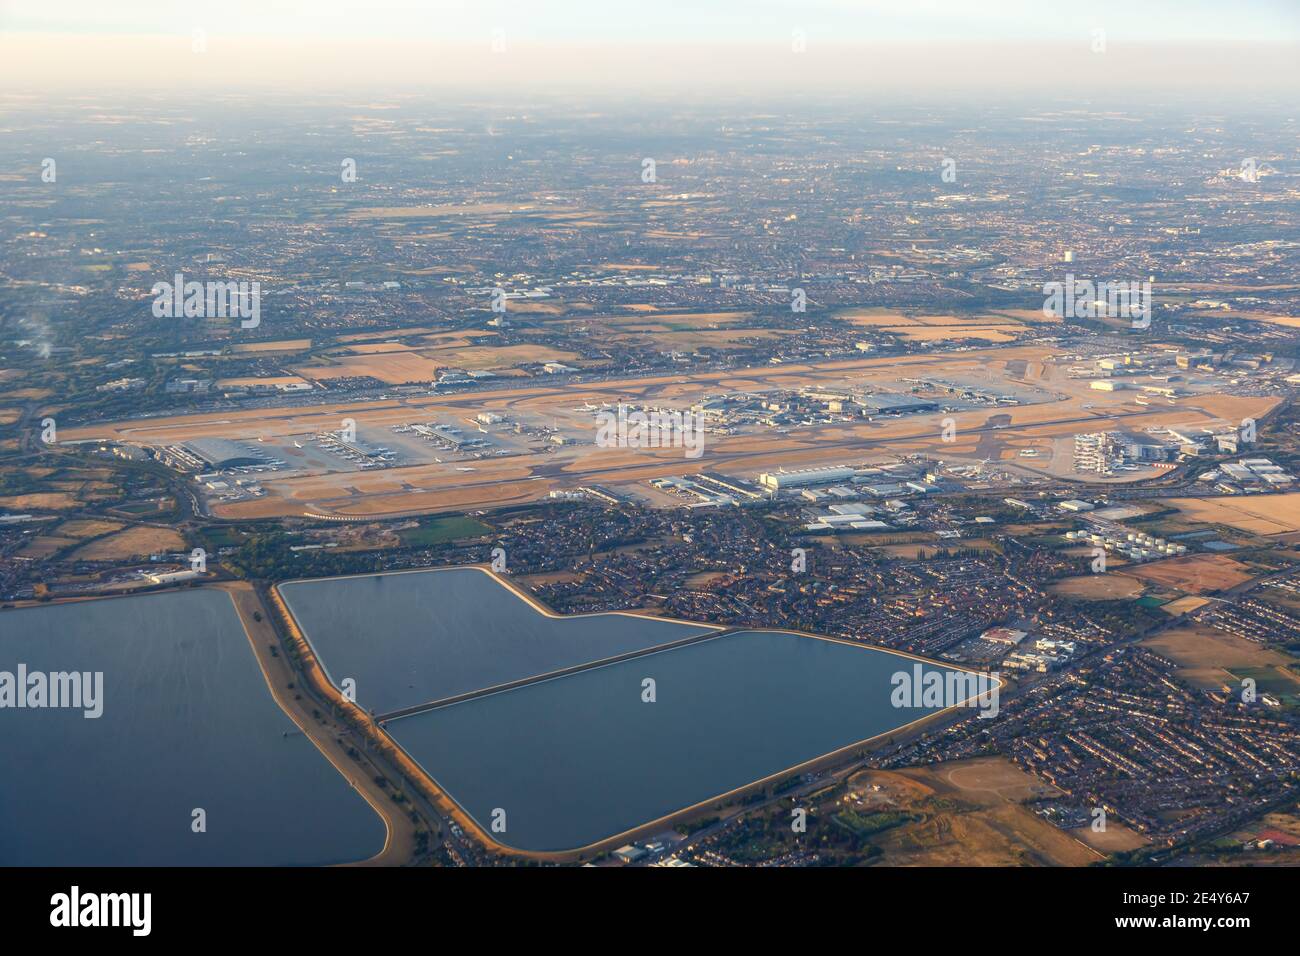 London, United Kingdom - August 1, 2018: Aerial view of London Heathrow airport (LHR) in the United Kingdom. Stock Photo